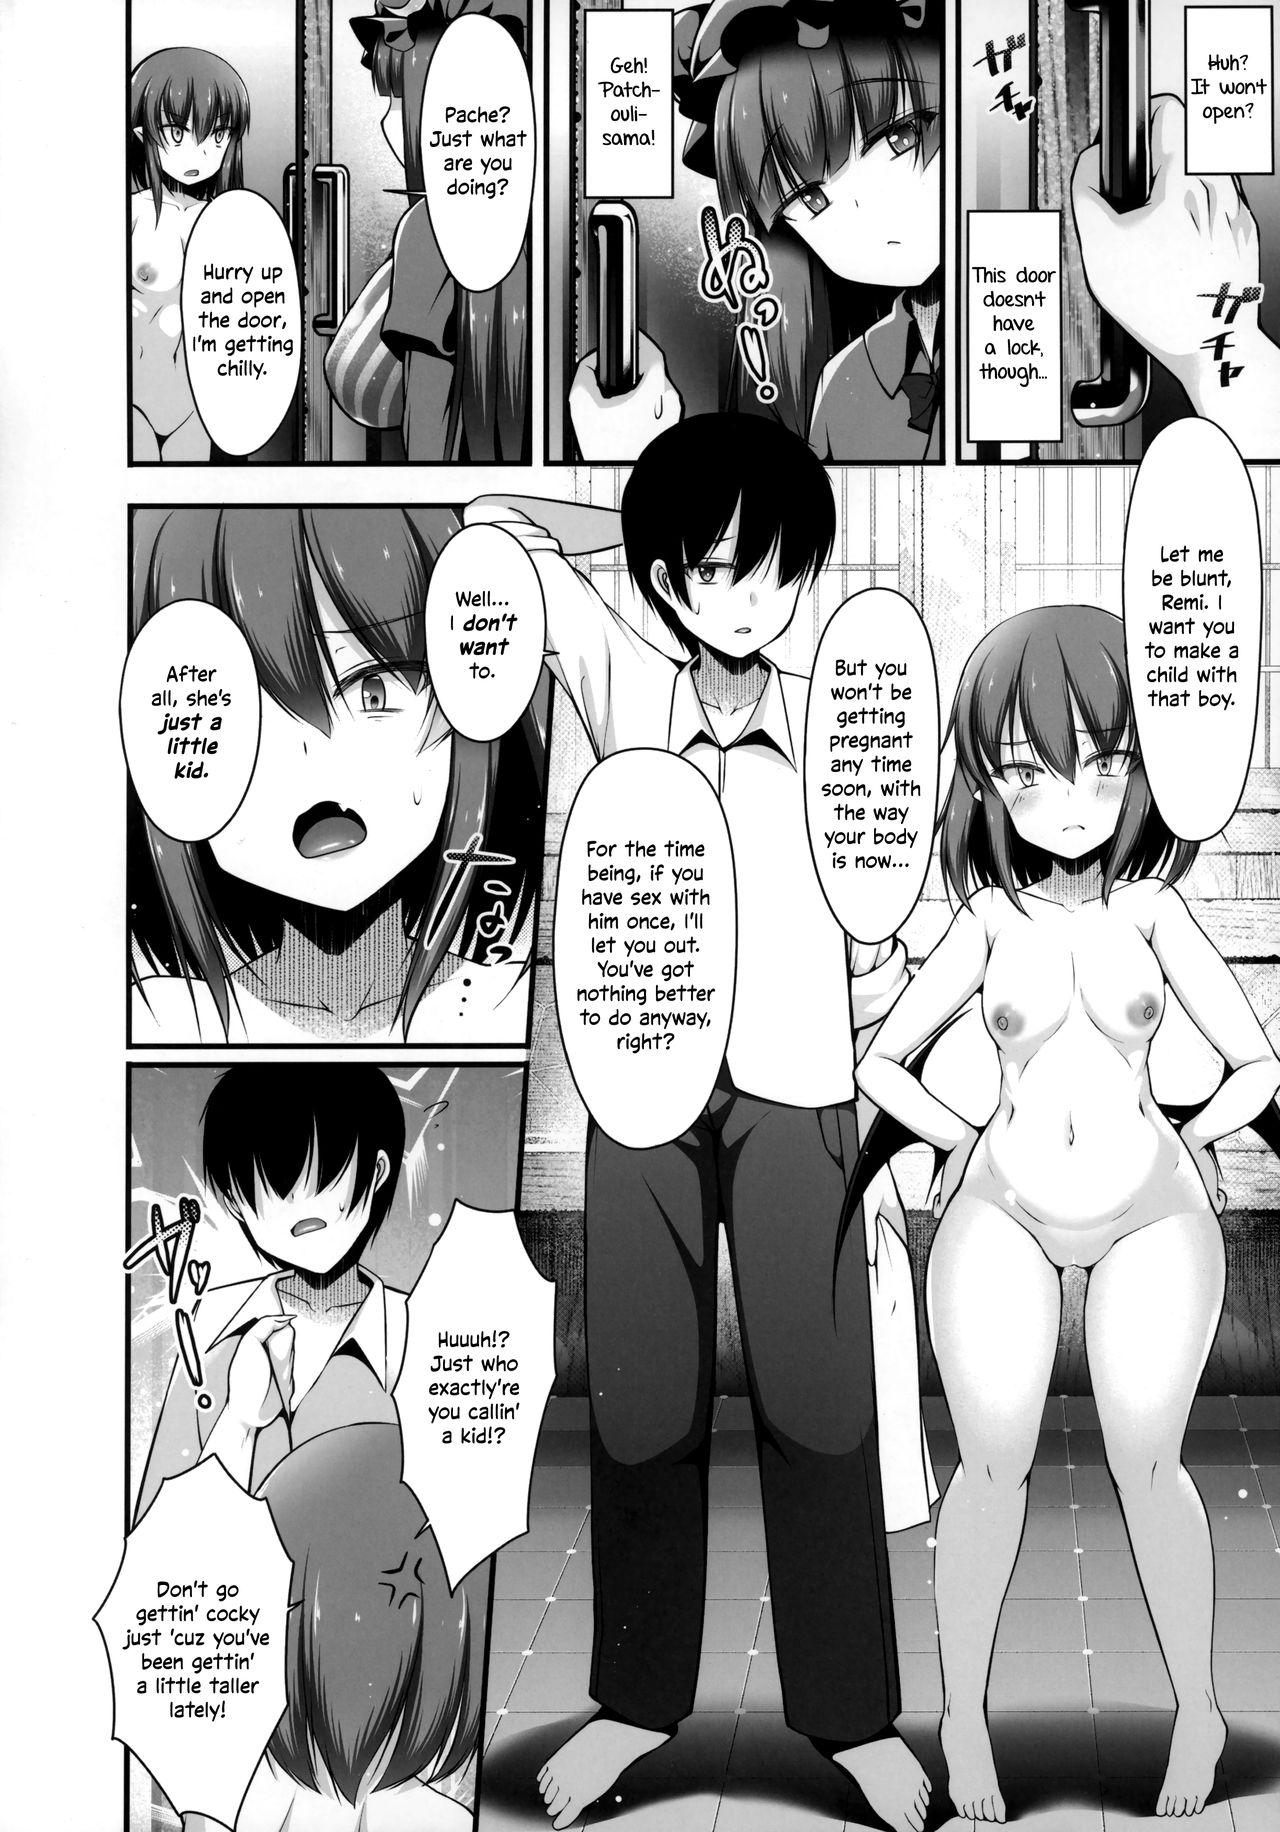 Ffm Remilia Ojou-sama to Sex Suru made Deranai Heya | A Room Which You Can't Leave Until You Have Sex With Lady Remilia - Touhou project Nasty Porn - Page 5